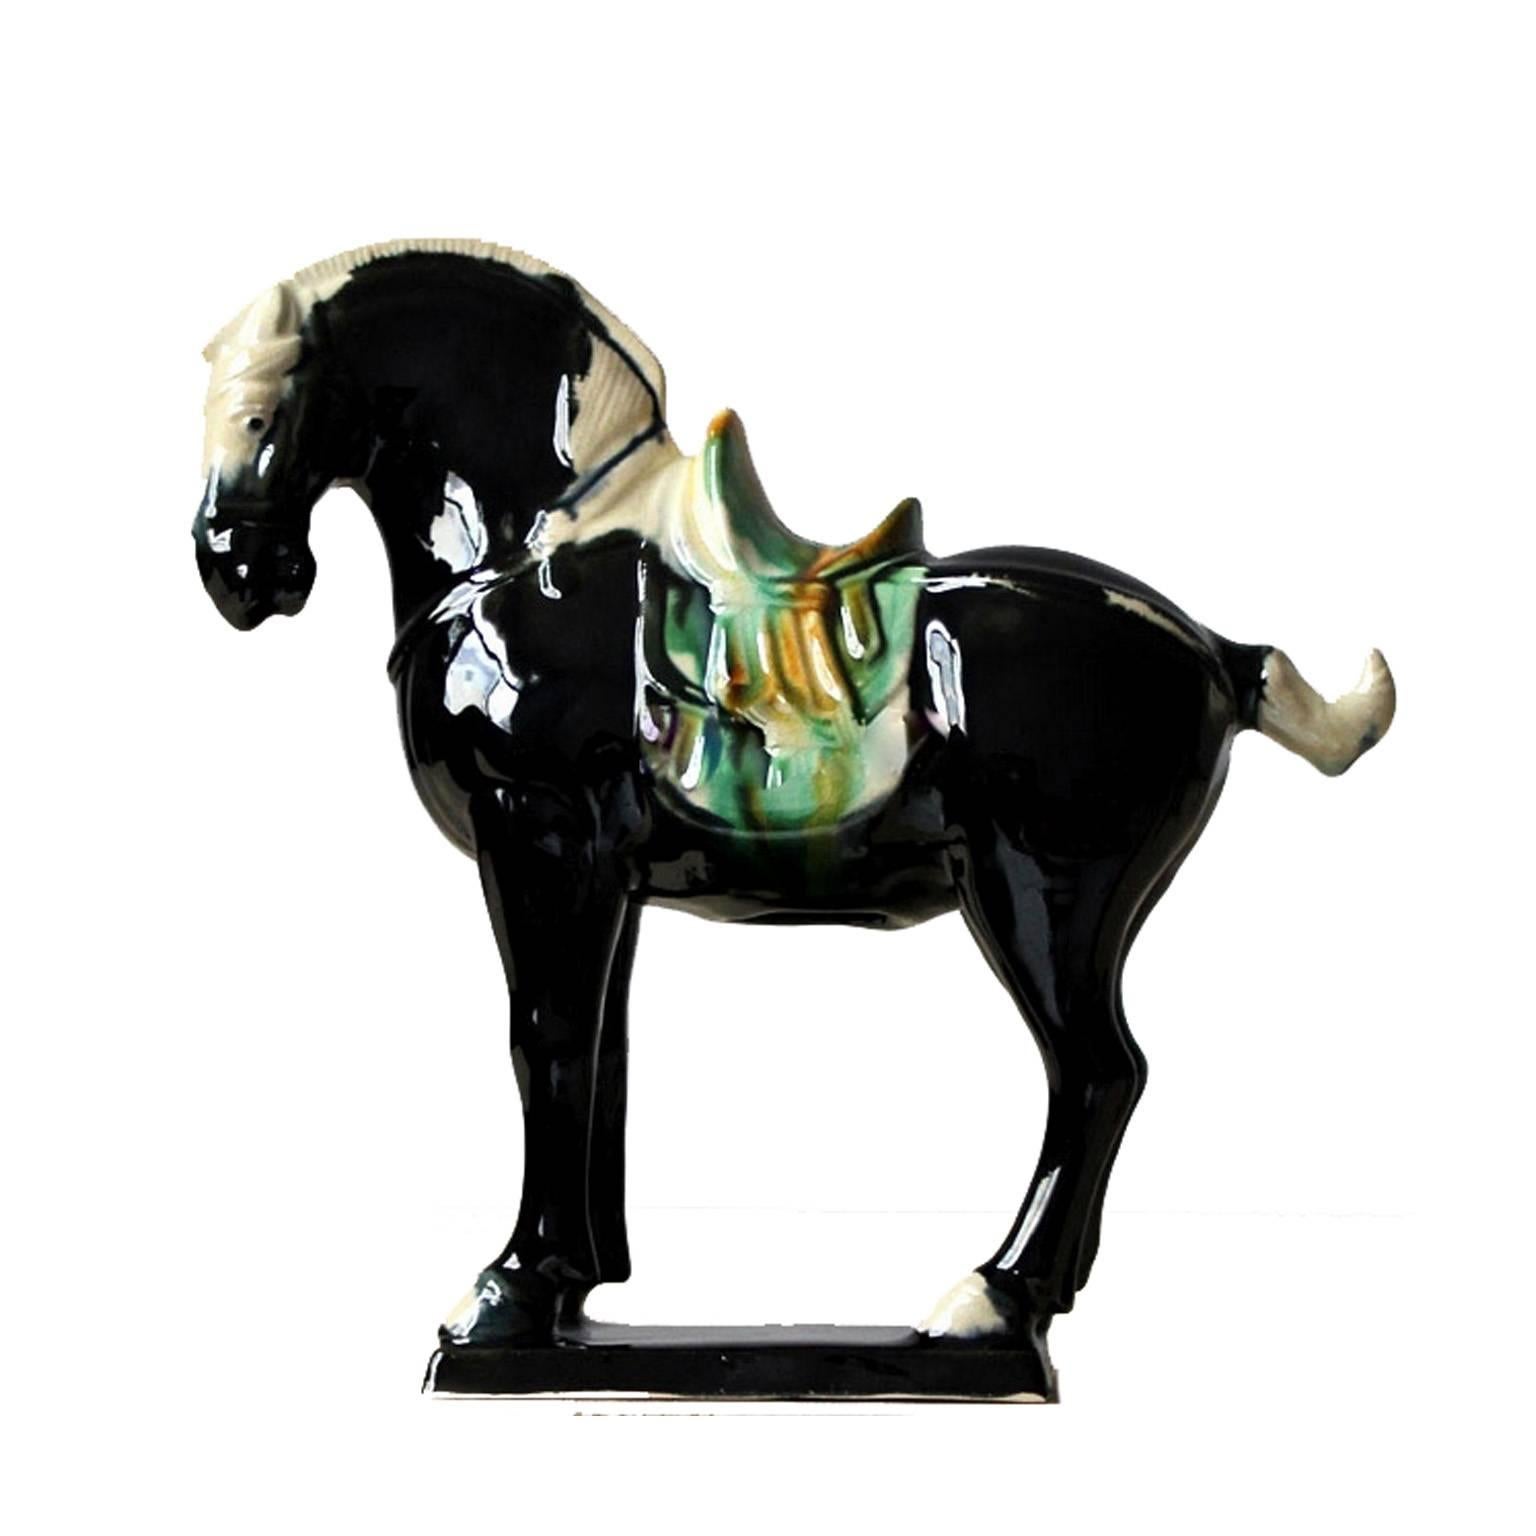 This set of beautiful terracotta horses are hand made and painted using the ancient Tri-Glaze techniques. The Sancai technique dates back to the Tang Dynasty (618–907AD). It is a true work of art. From the choice of colors to the way glaze is